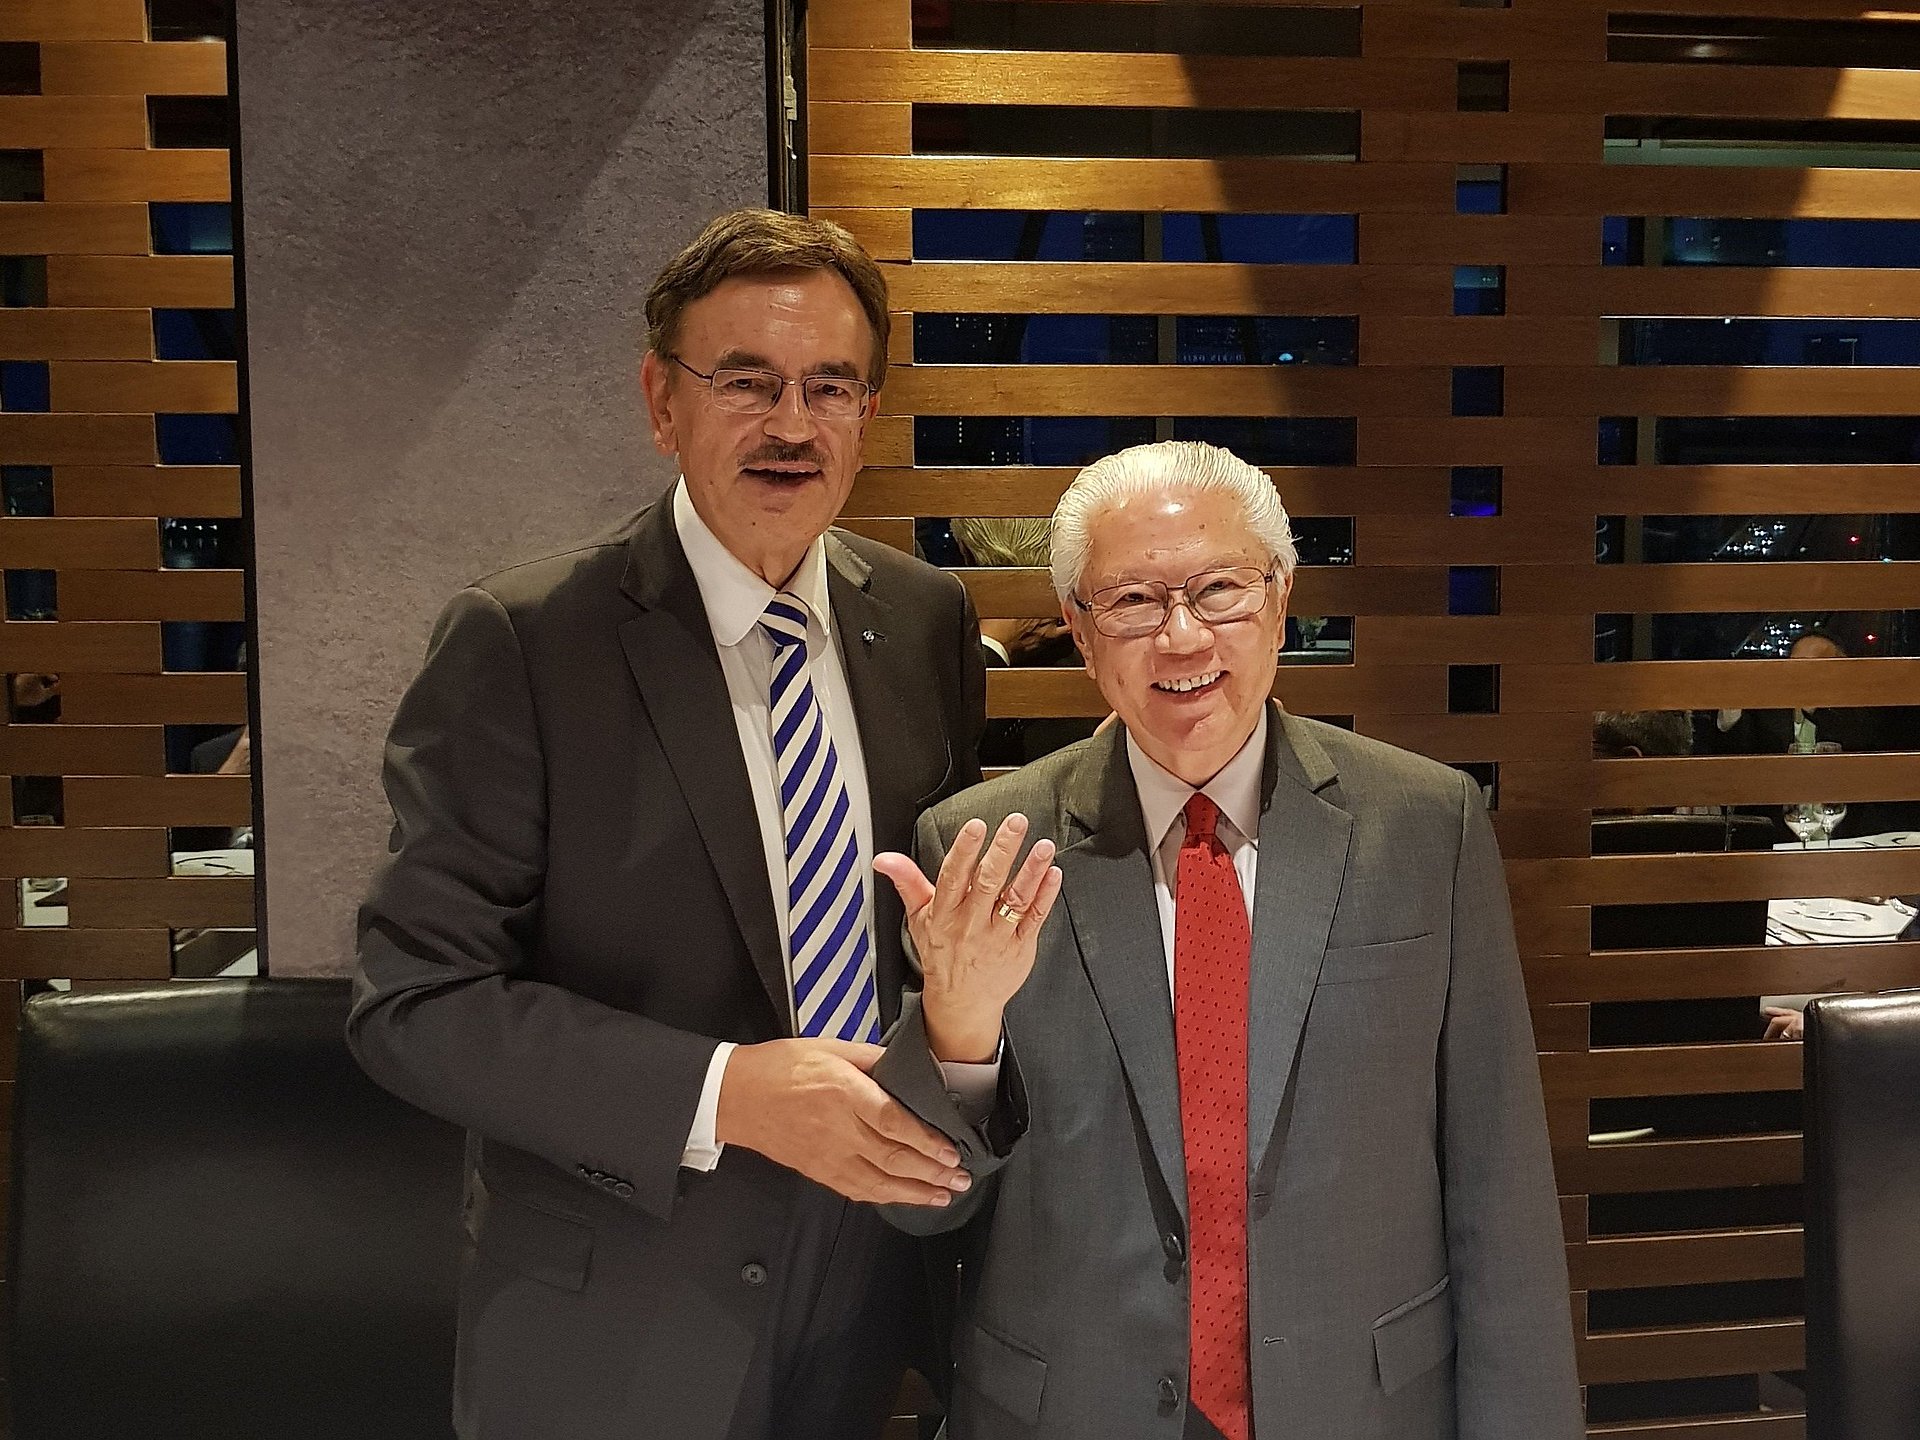 On a visit to TUM Asia, TUM President Wolfgang A. Herrmann presented the Golden Ring of Honor to Tony Tan.